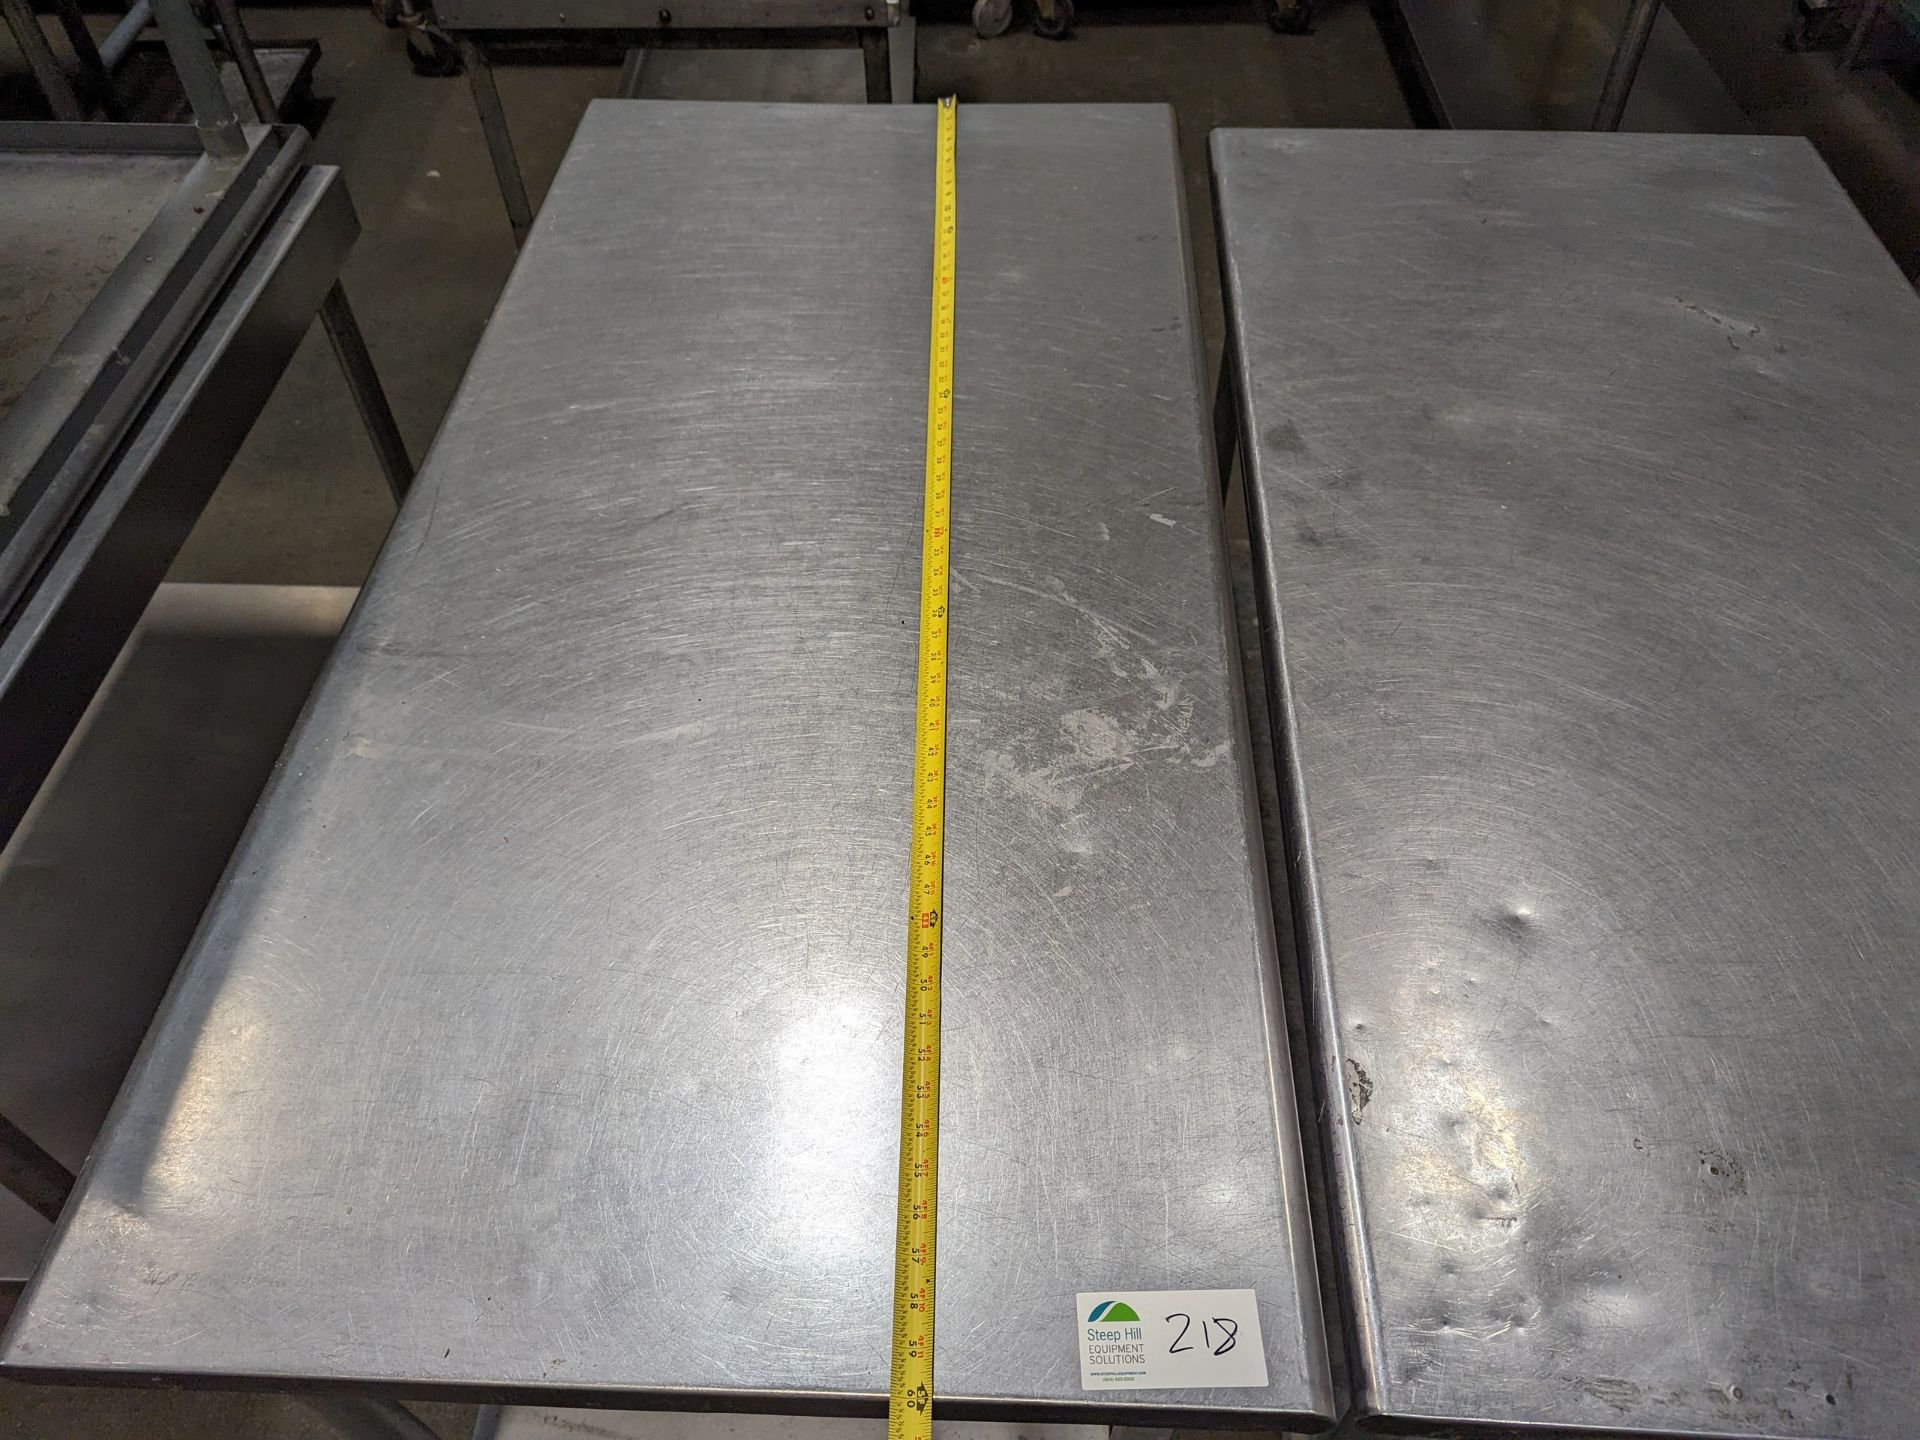 Lot of 2 5ft Long SS Tables, Dimensions LxWxH: 60x30x35 each - Image 3 of 7